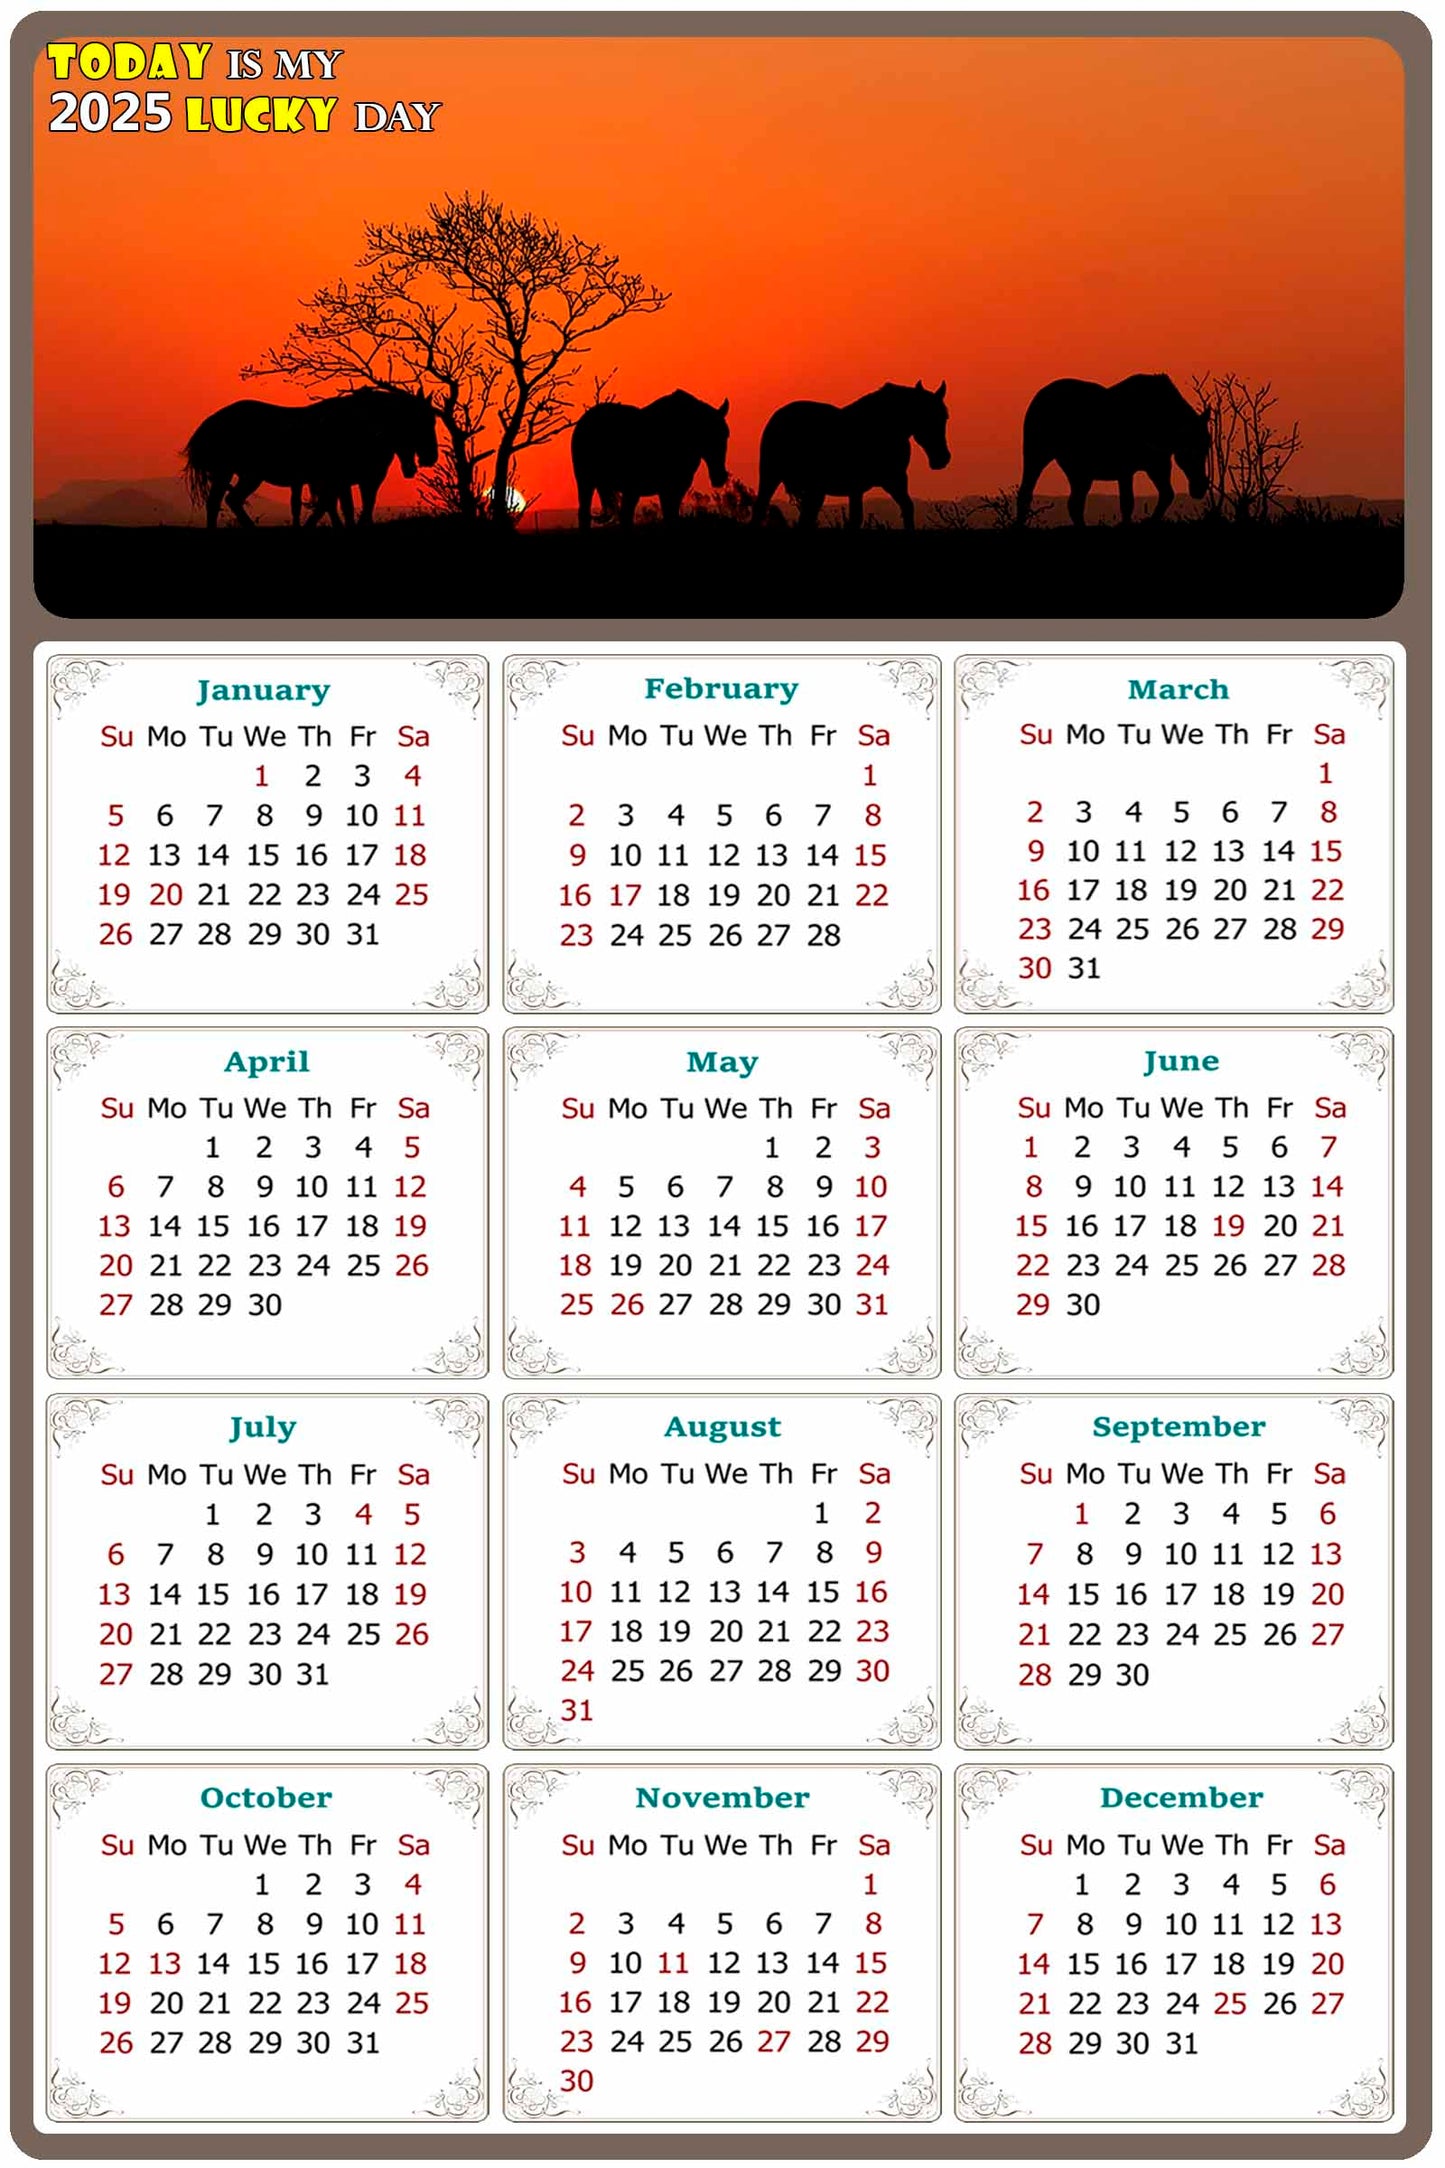 2025 Magnetic Calendar - Calendar Magnets - Today is my Lucky Day - (Fade, Tear, and Water Resistant) - Horses Themed 011